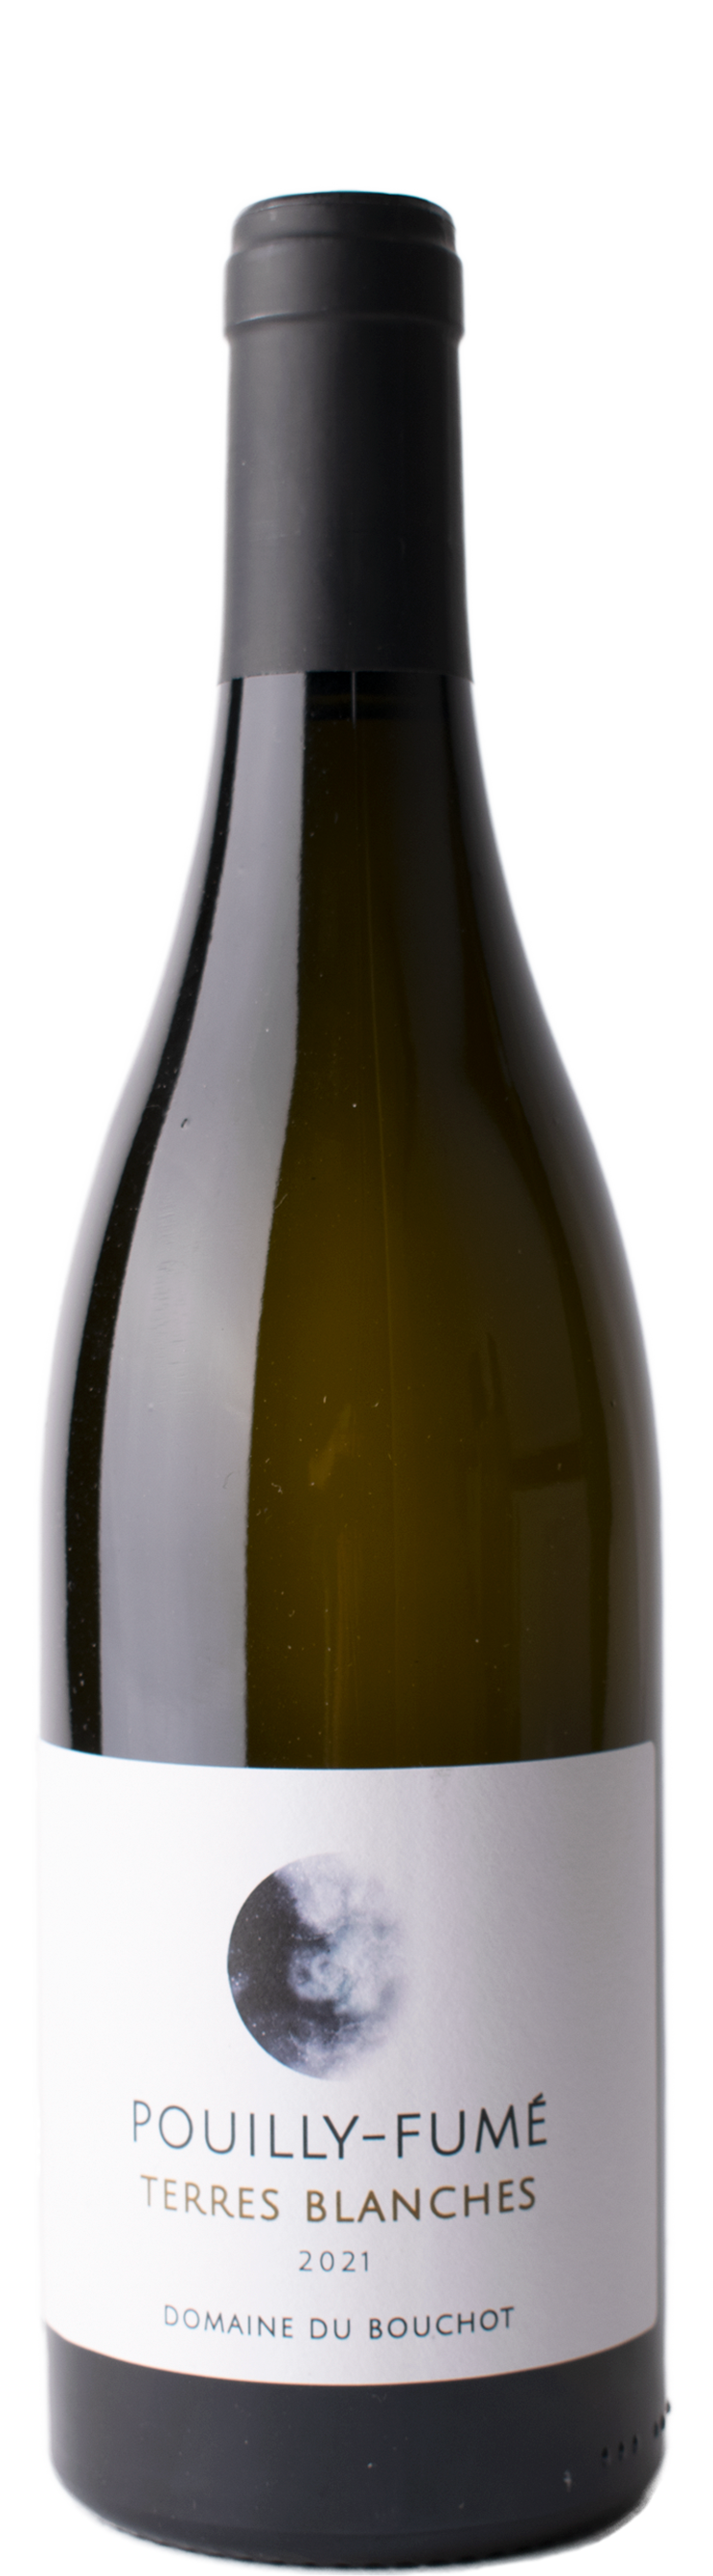 Pouilly Fume Terres Blanches 2021 0.375 L